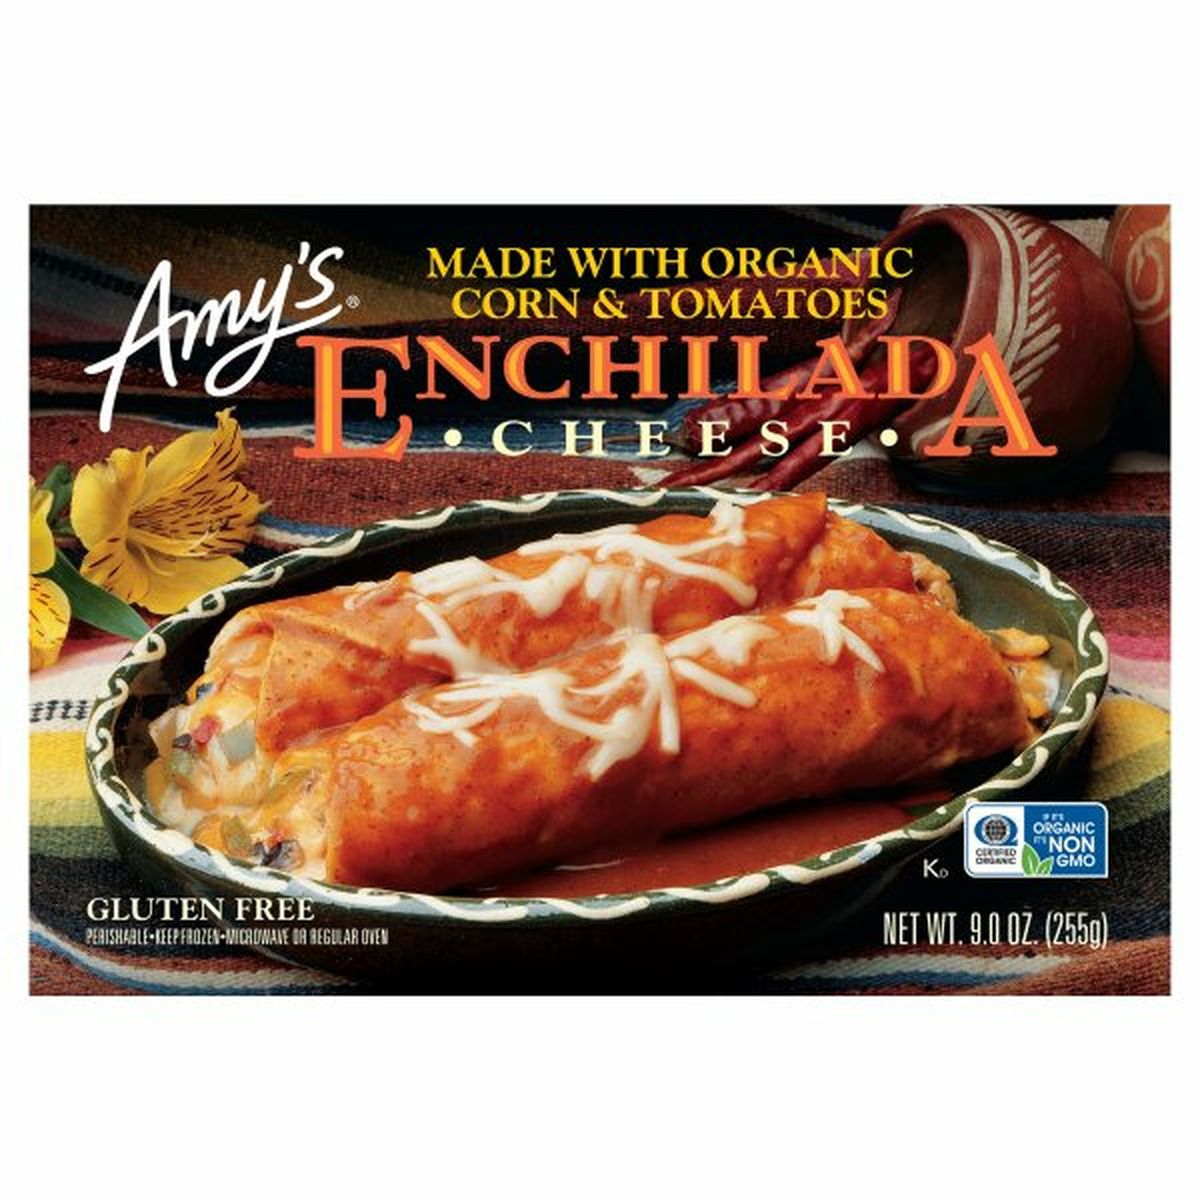 Calories in Amy's Kitchen Enchilada, Cheese